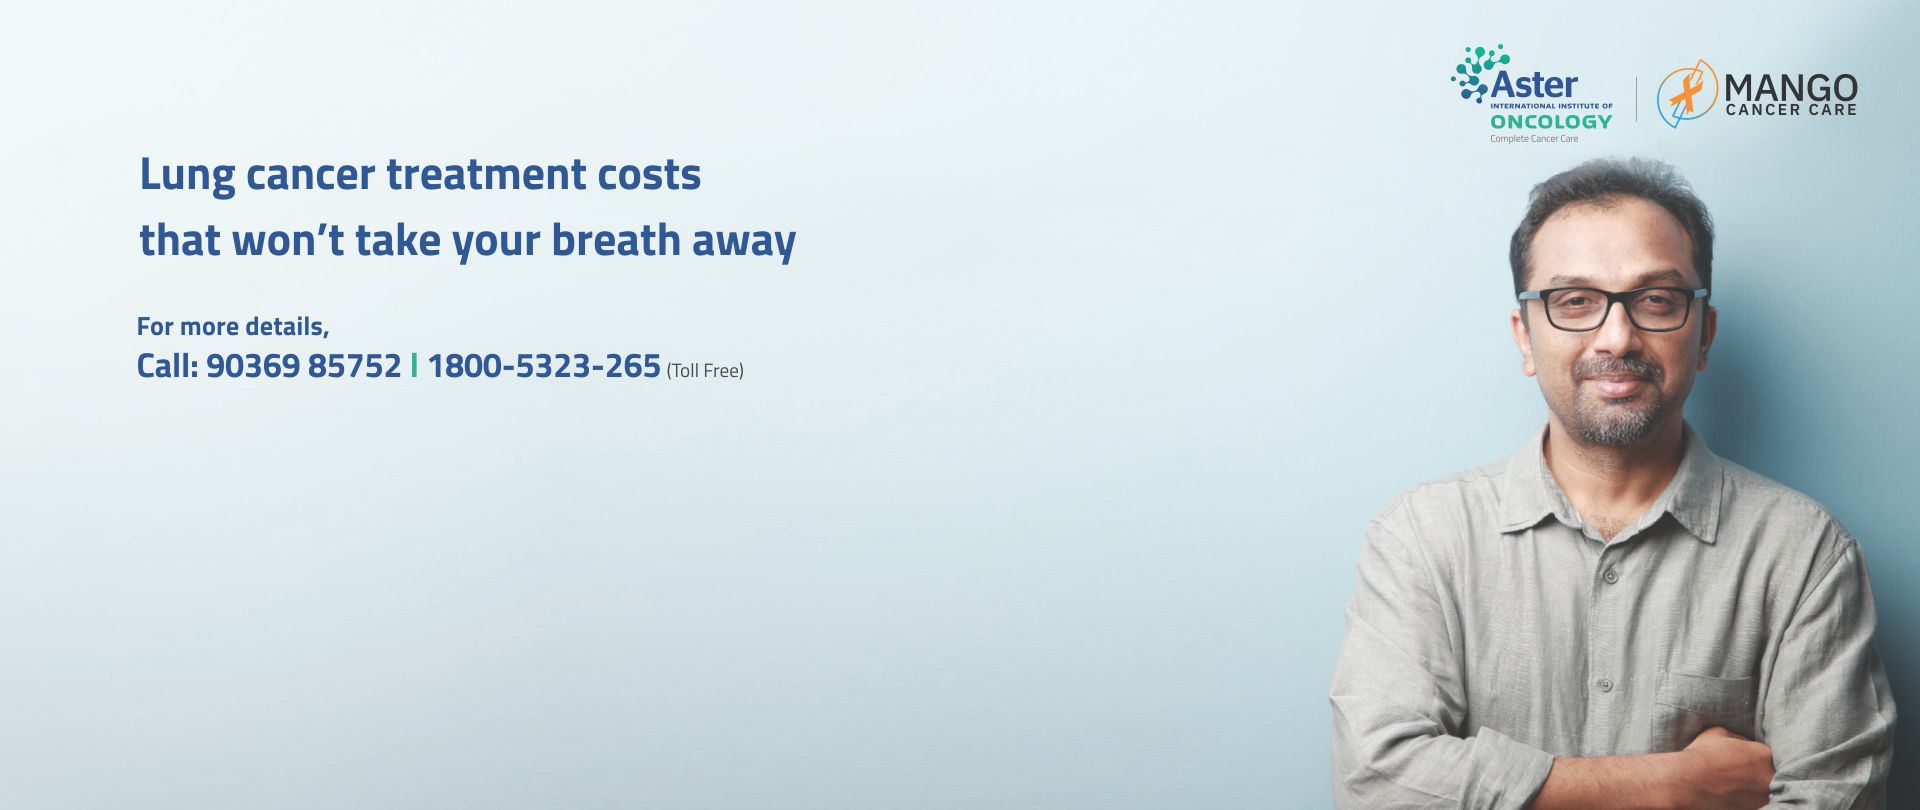 lung cancer treatment cost at Aster hospital in bangalore